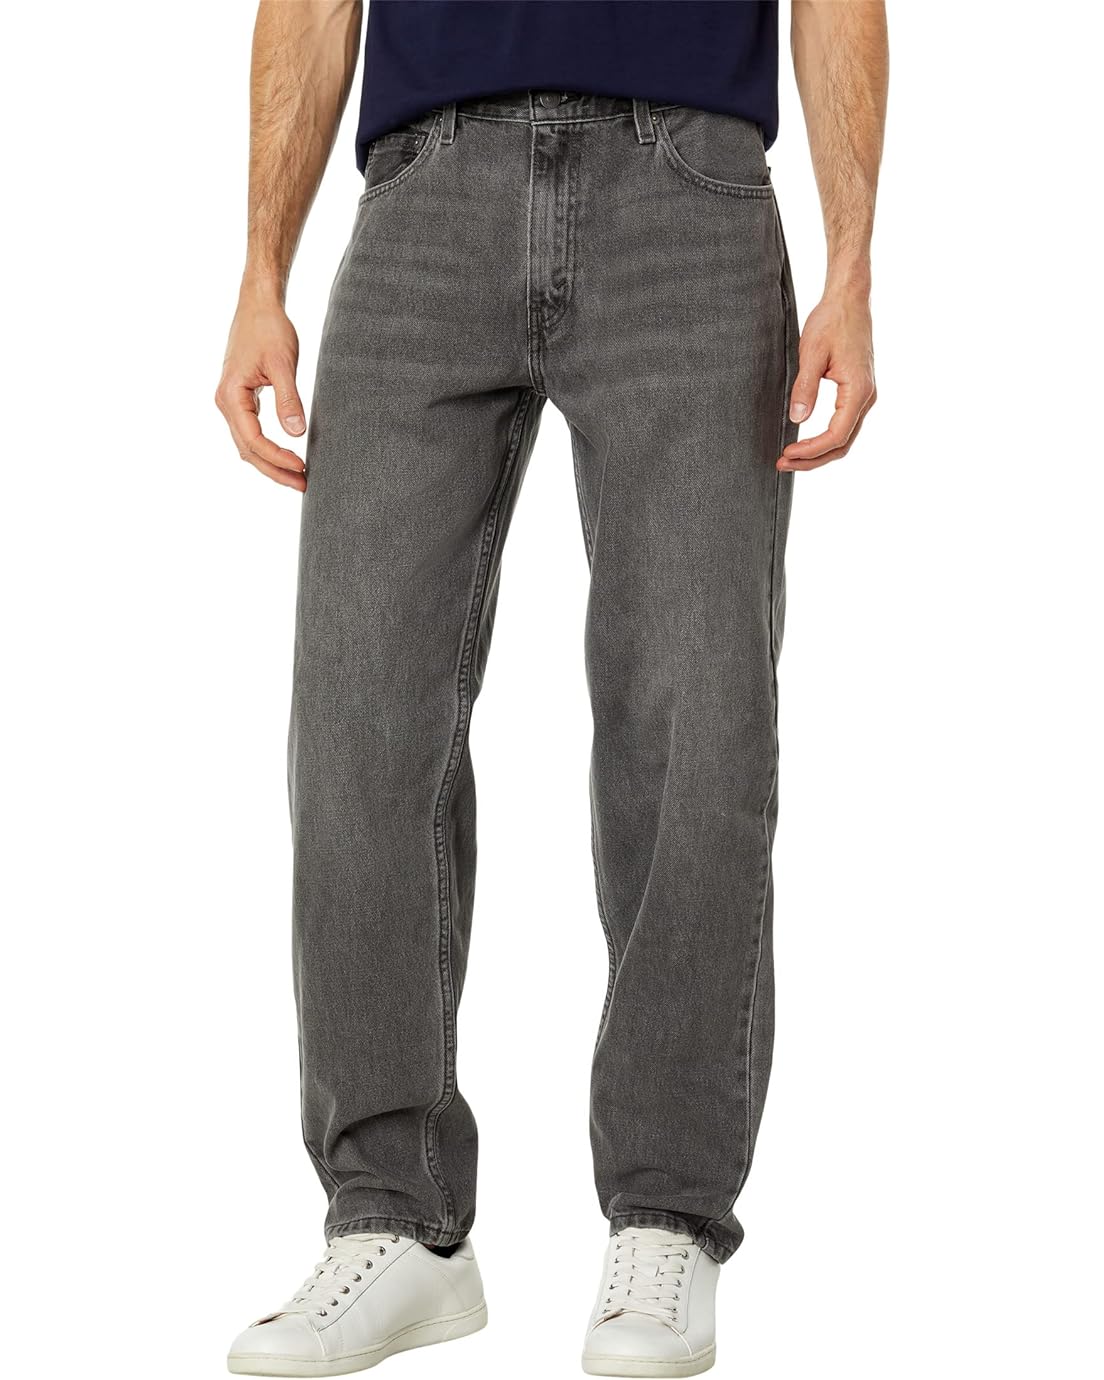 Levis Mens 550 92 Relaxed